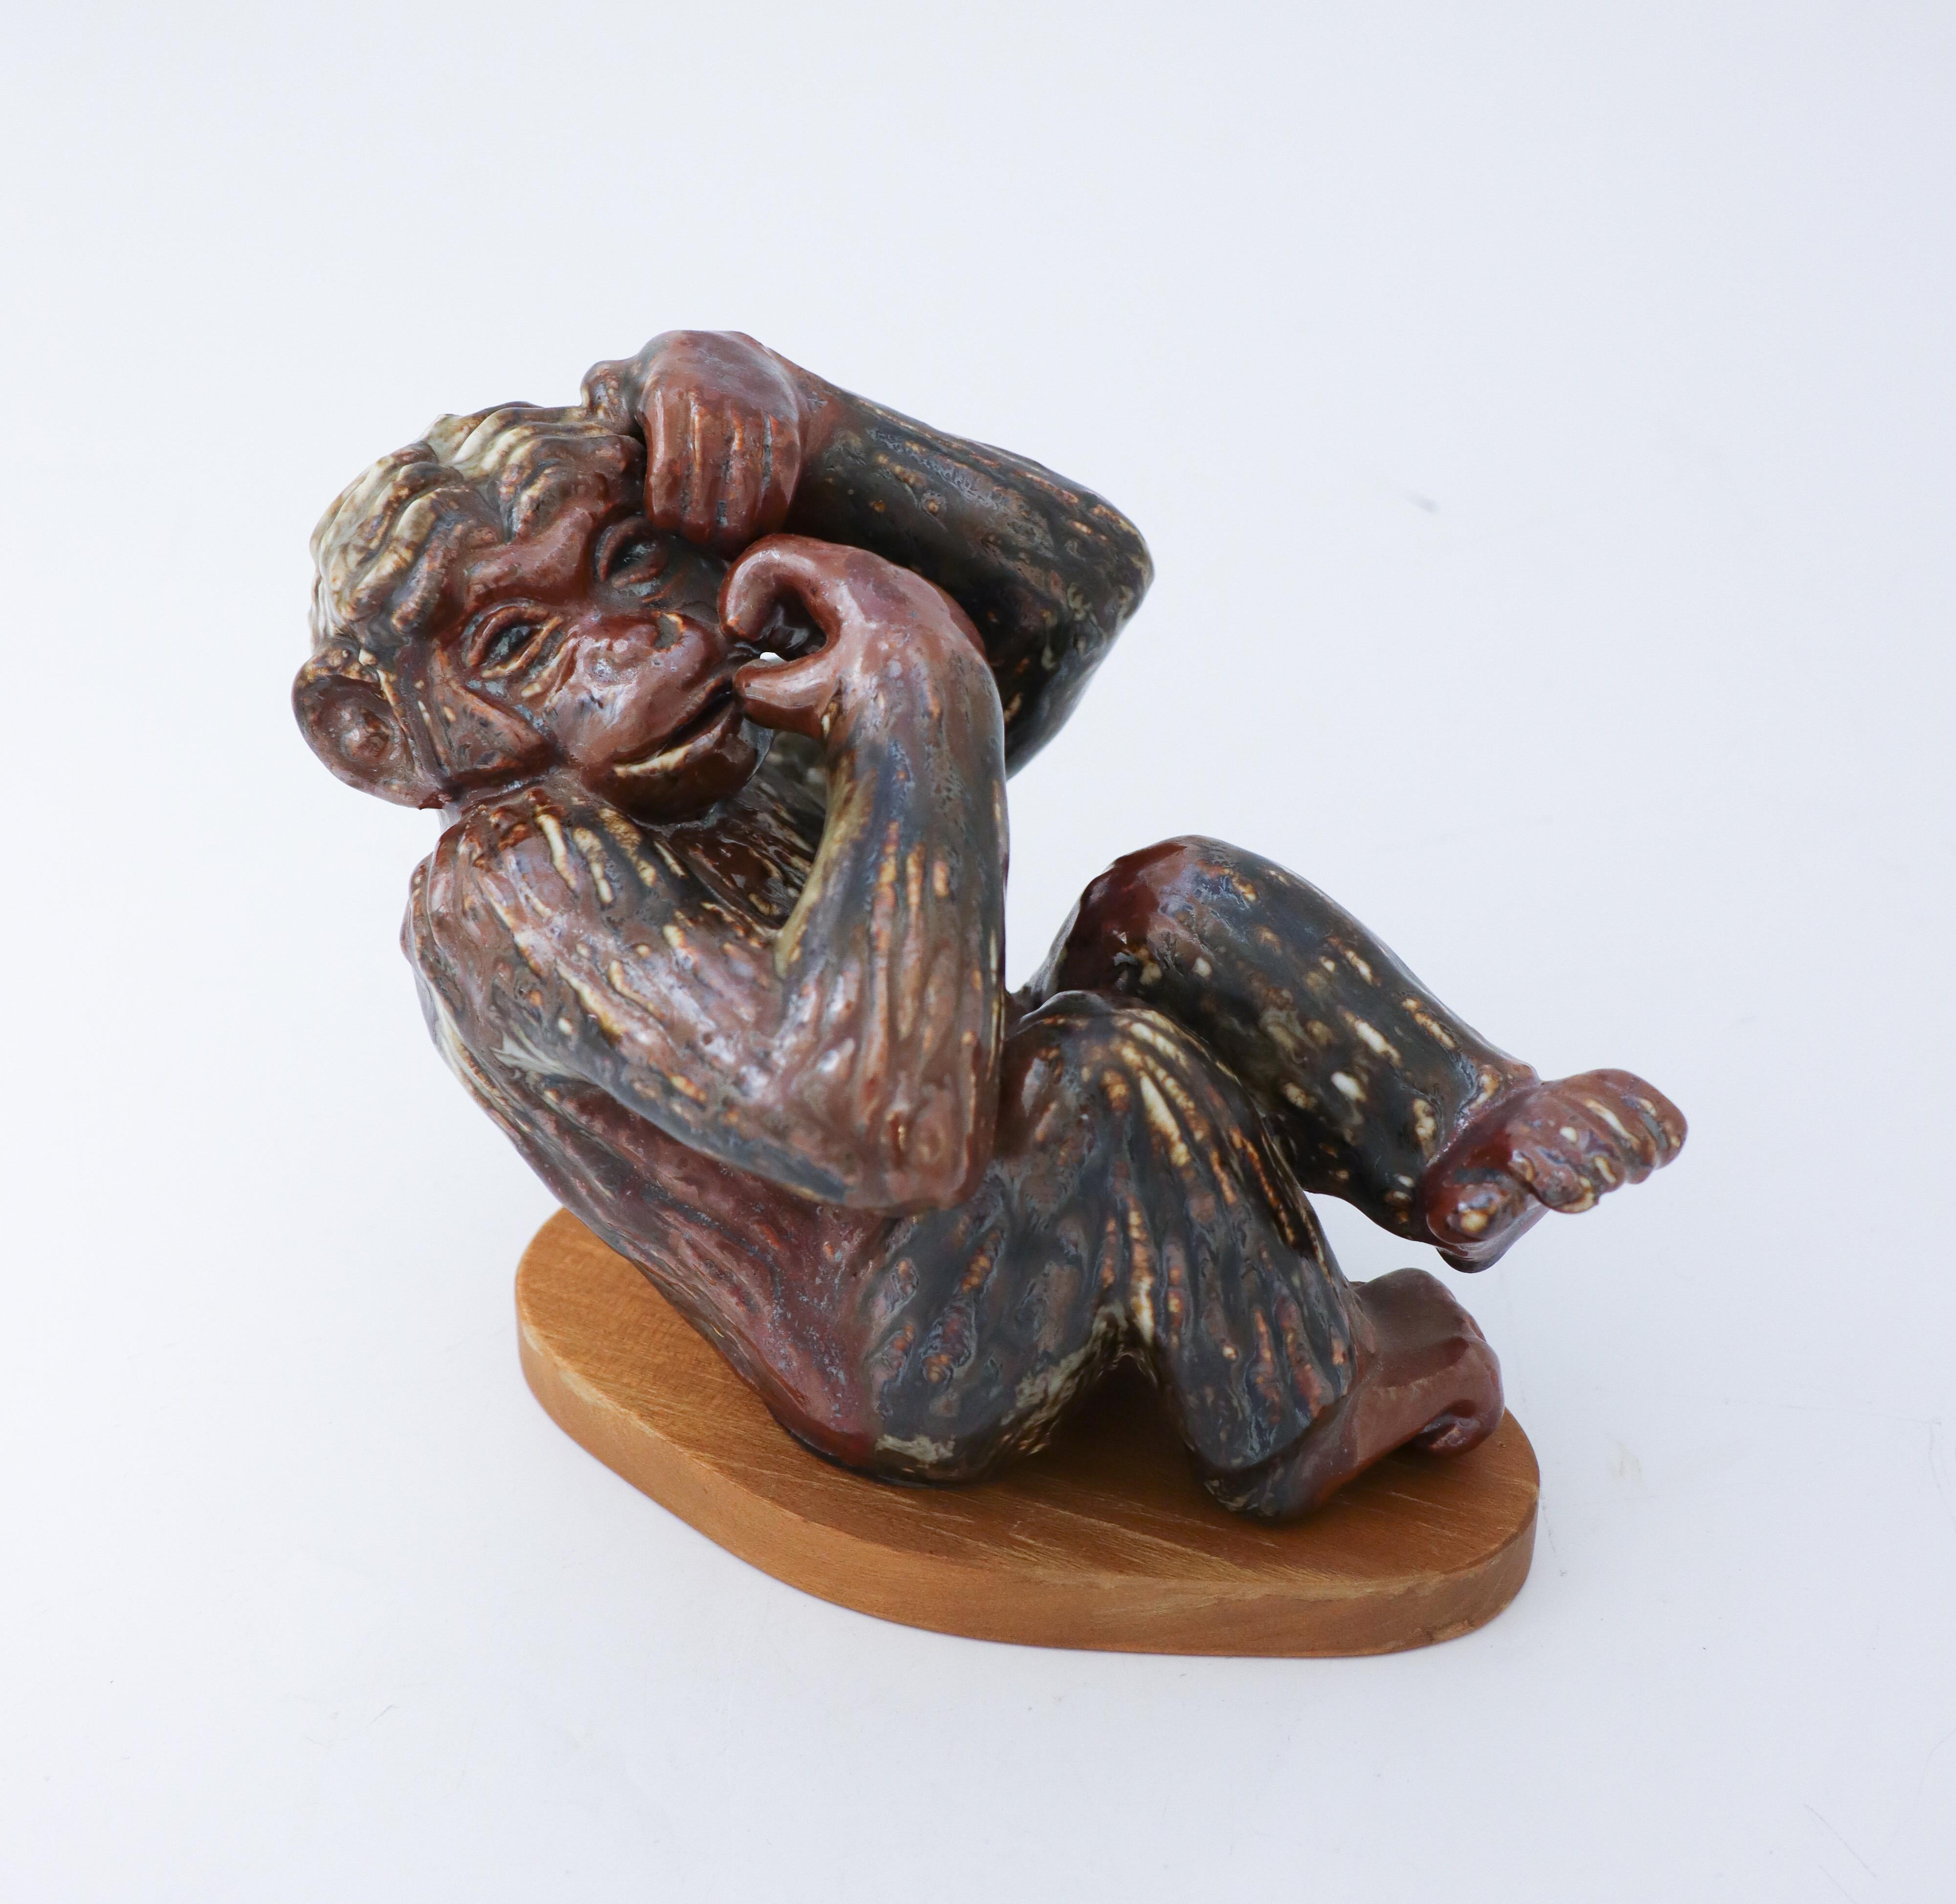 A lovely animal sculpture of a monkey designed by Gunnar Nylund at Rörstrand, it is 16 cm high and in very good condition with a lovely glaze. It comes with the original wooden base. The sculpture is marked as 1st quality.